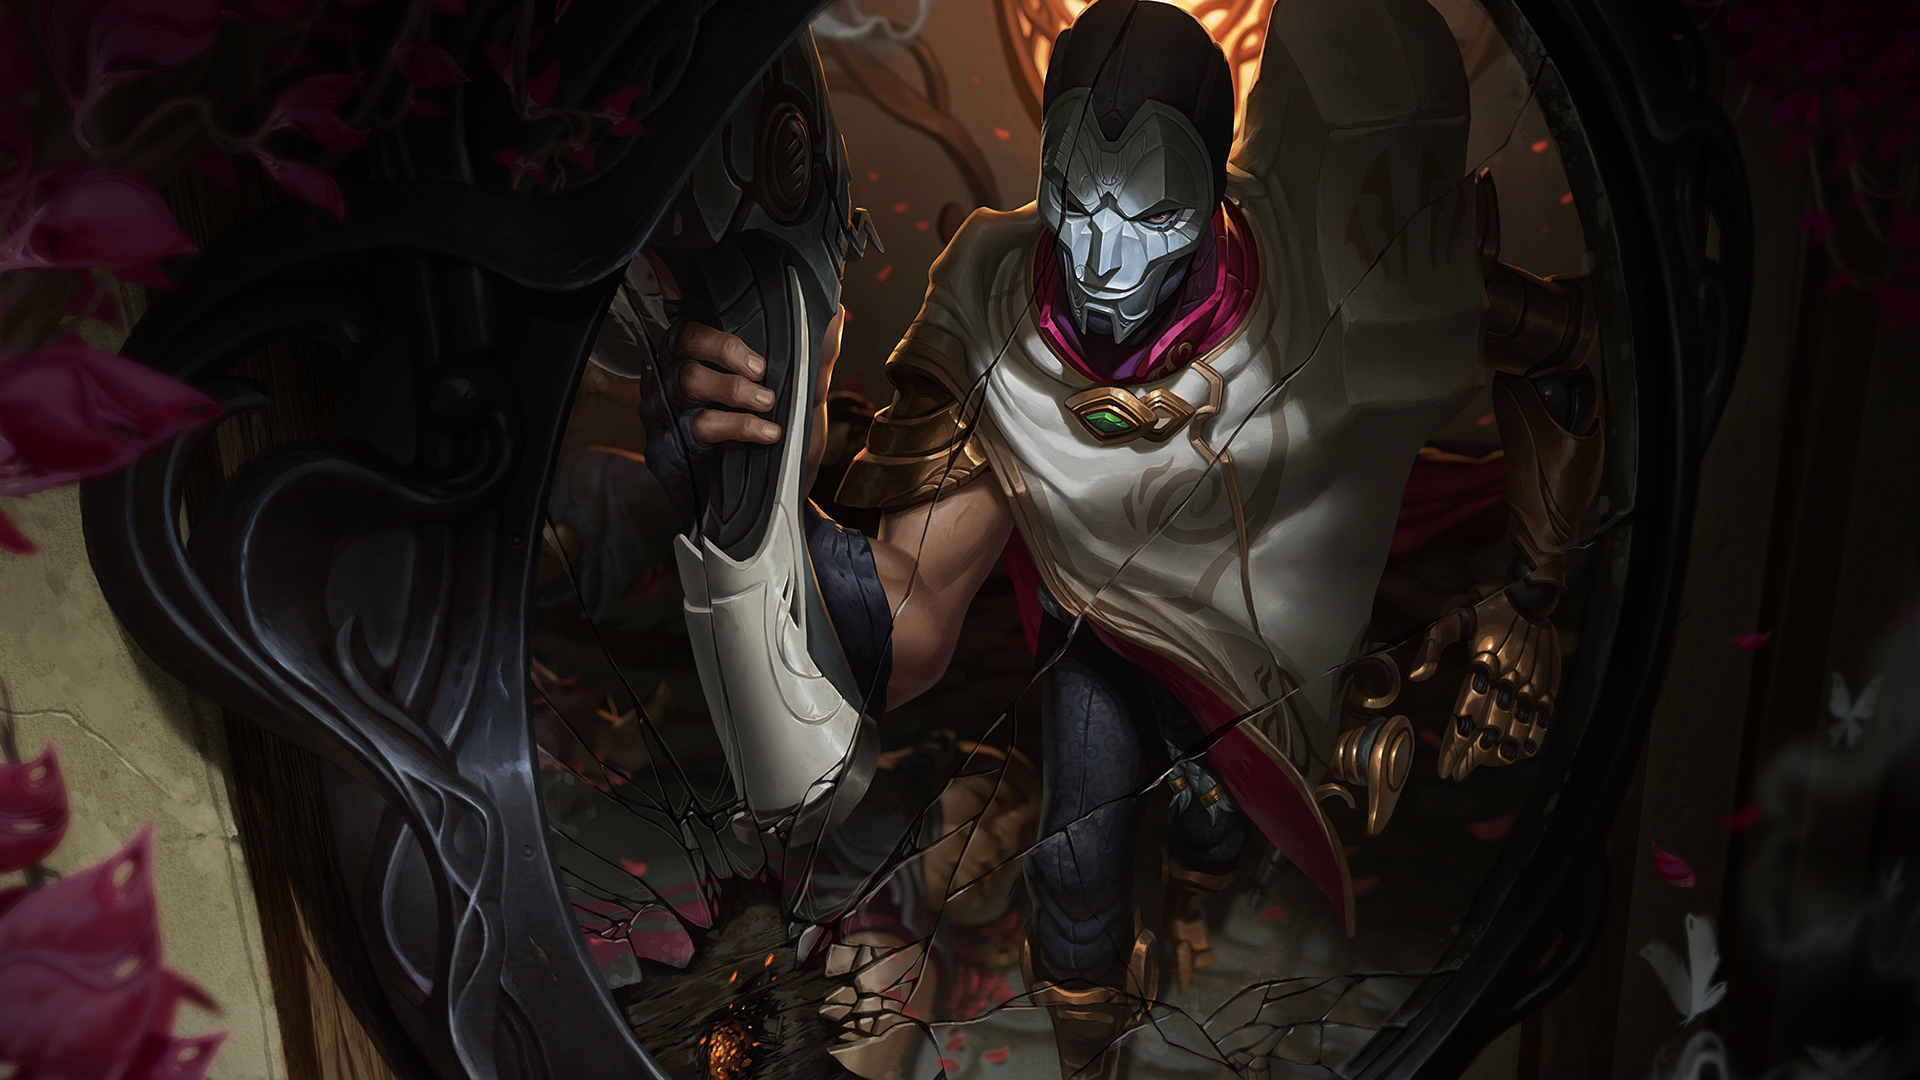 Load 140 More Imagesgrid View - Jhin Lol , HD Wallpaper & Backgrounds